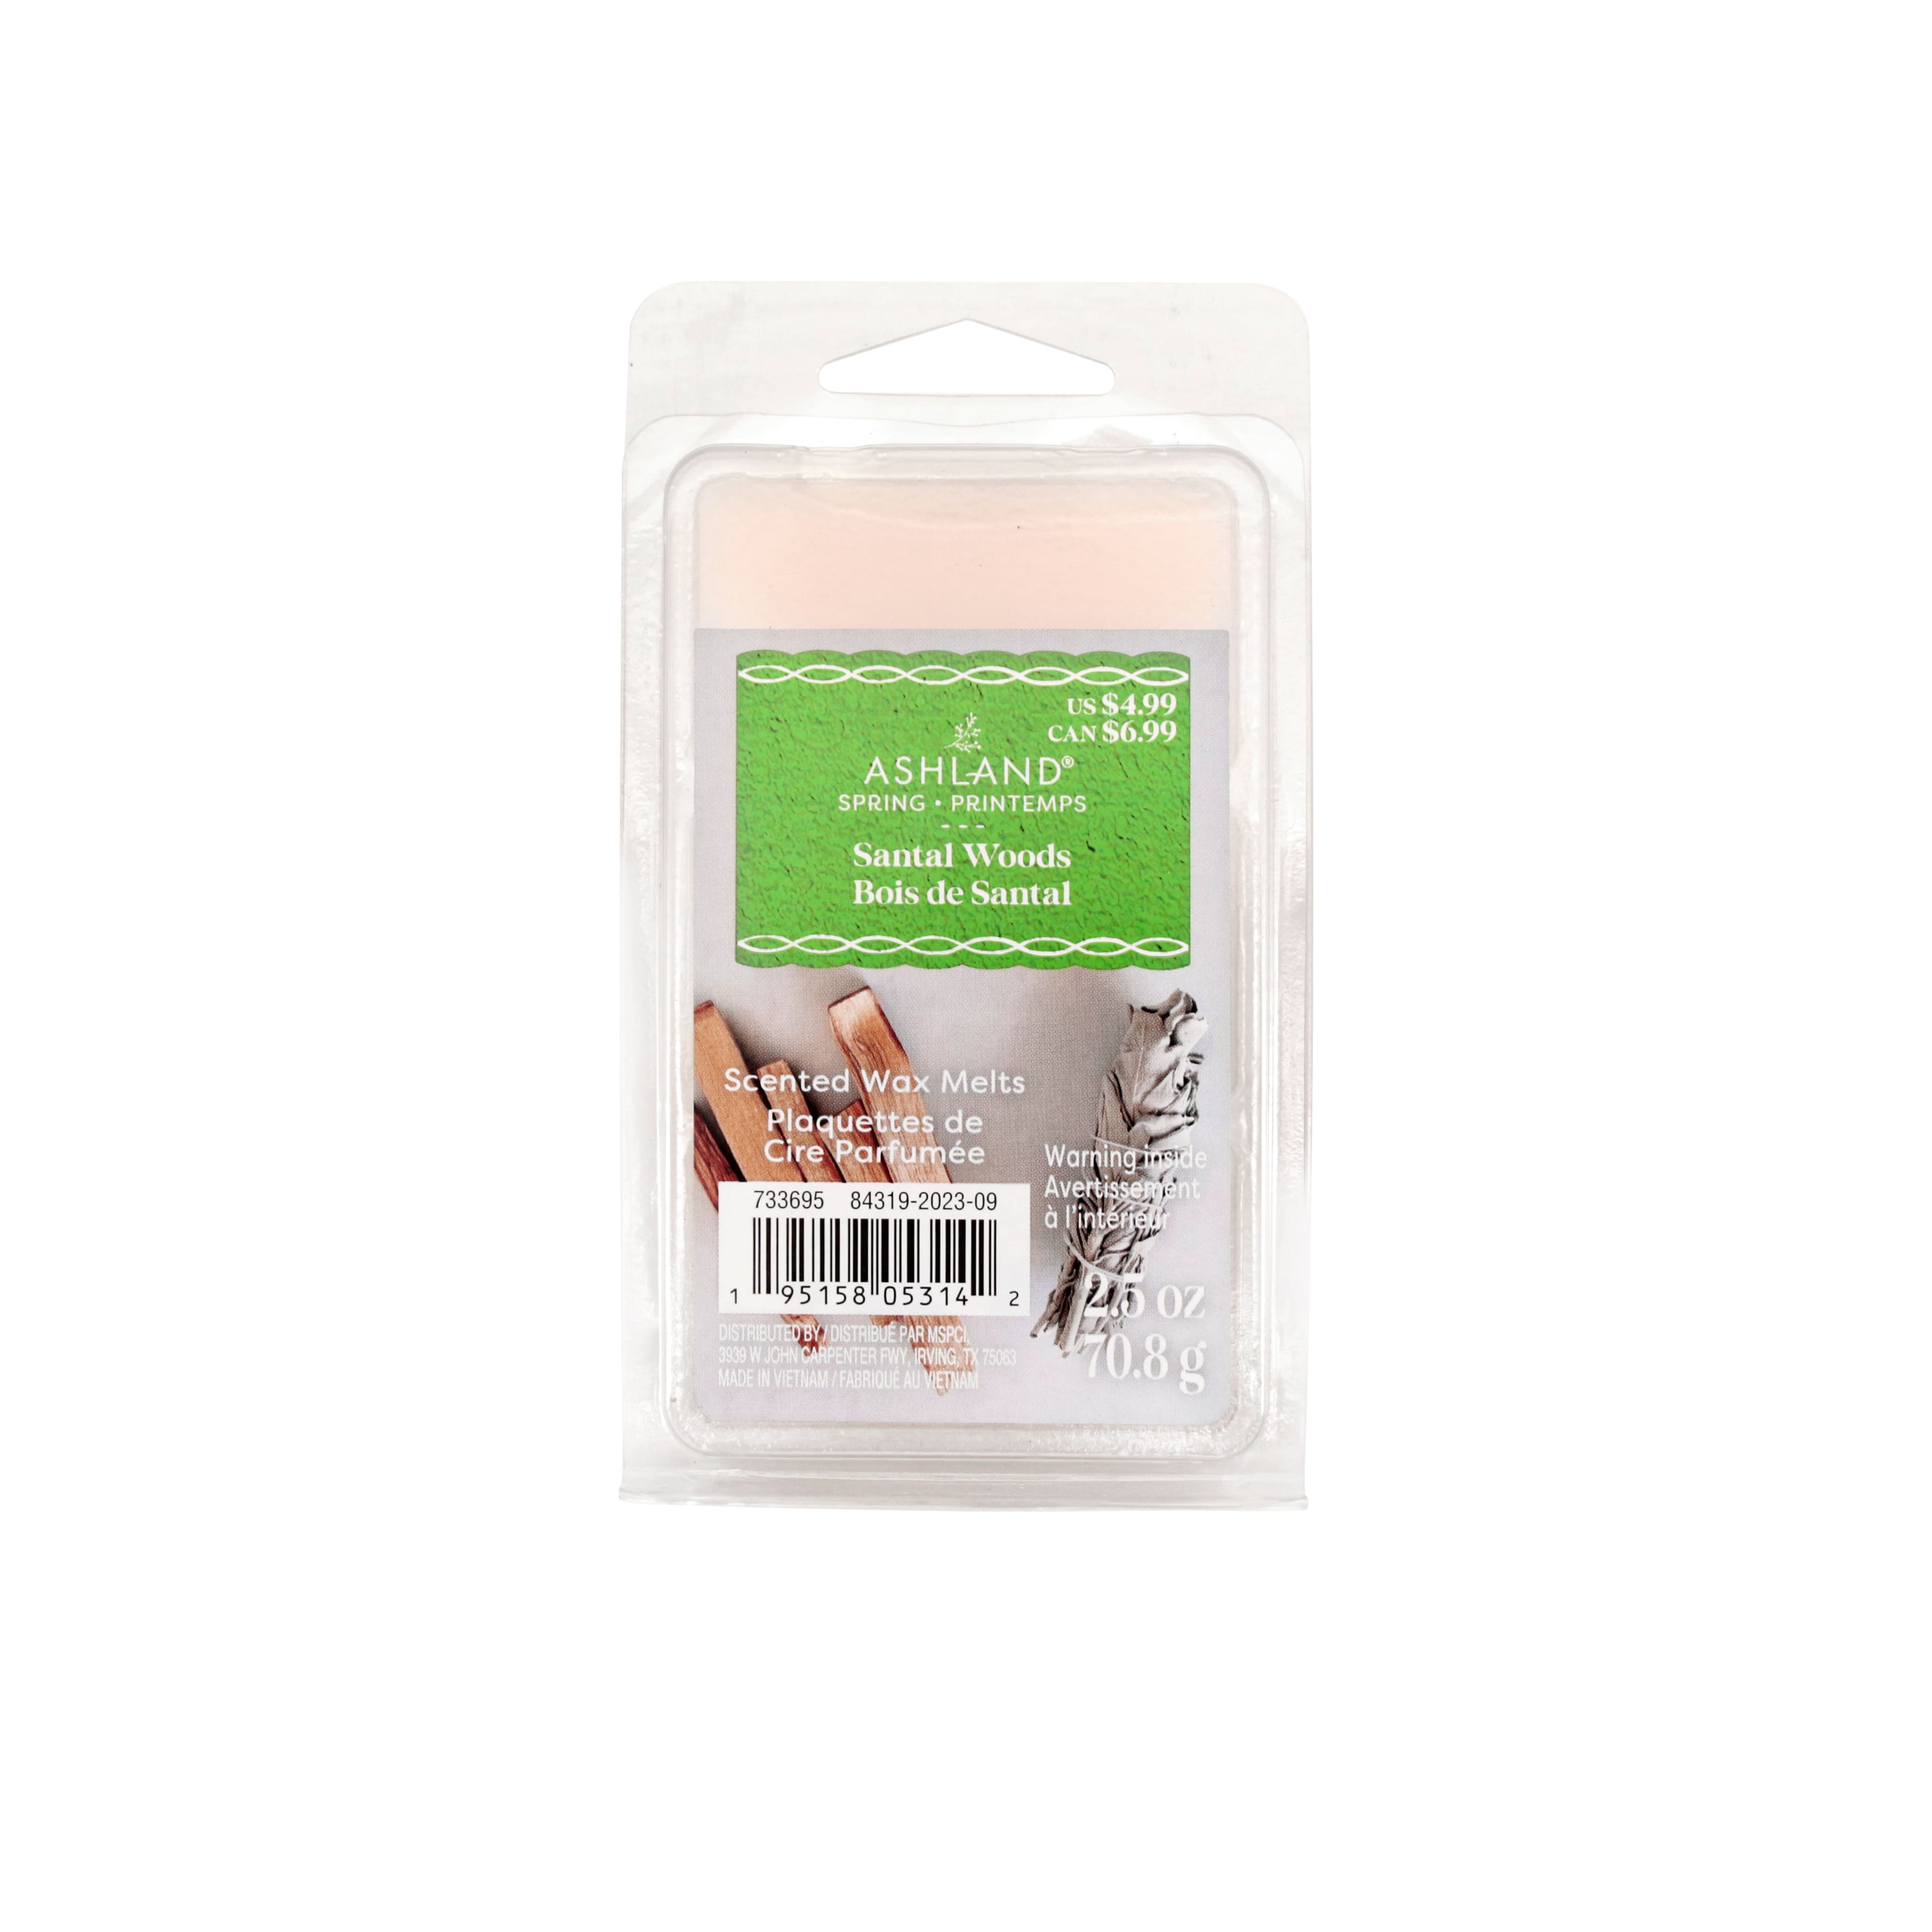 Santal Woods Scented Wax Melts by Ashland&#xAE;